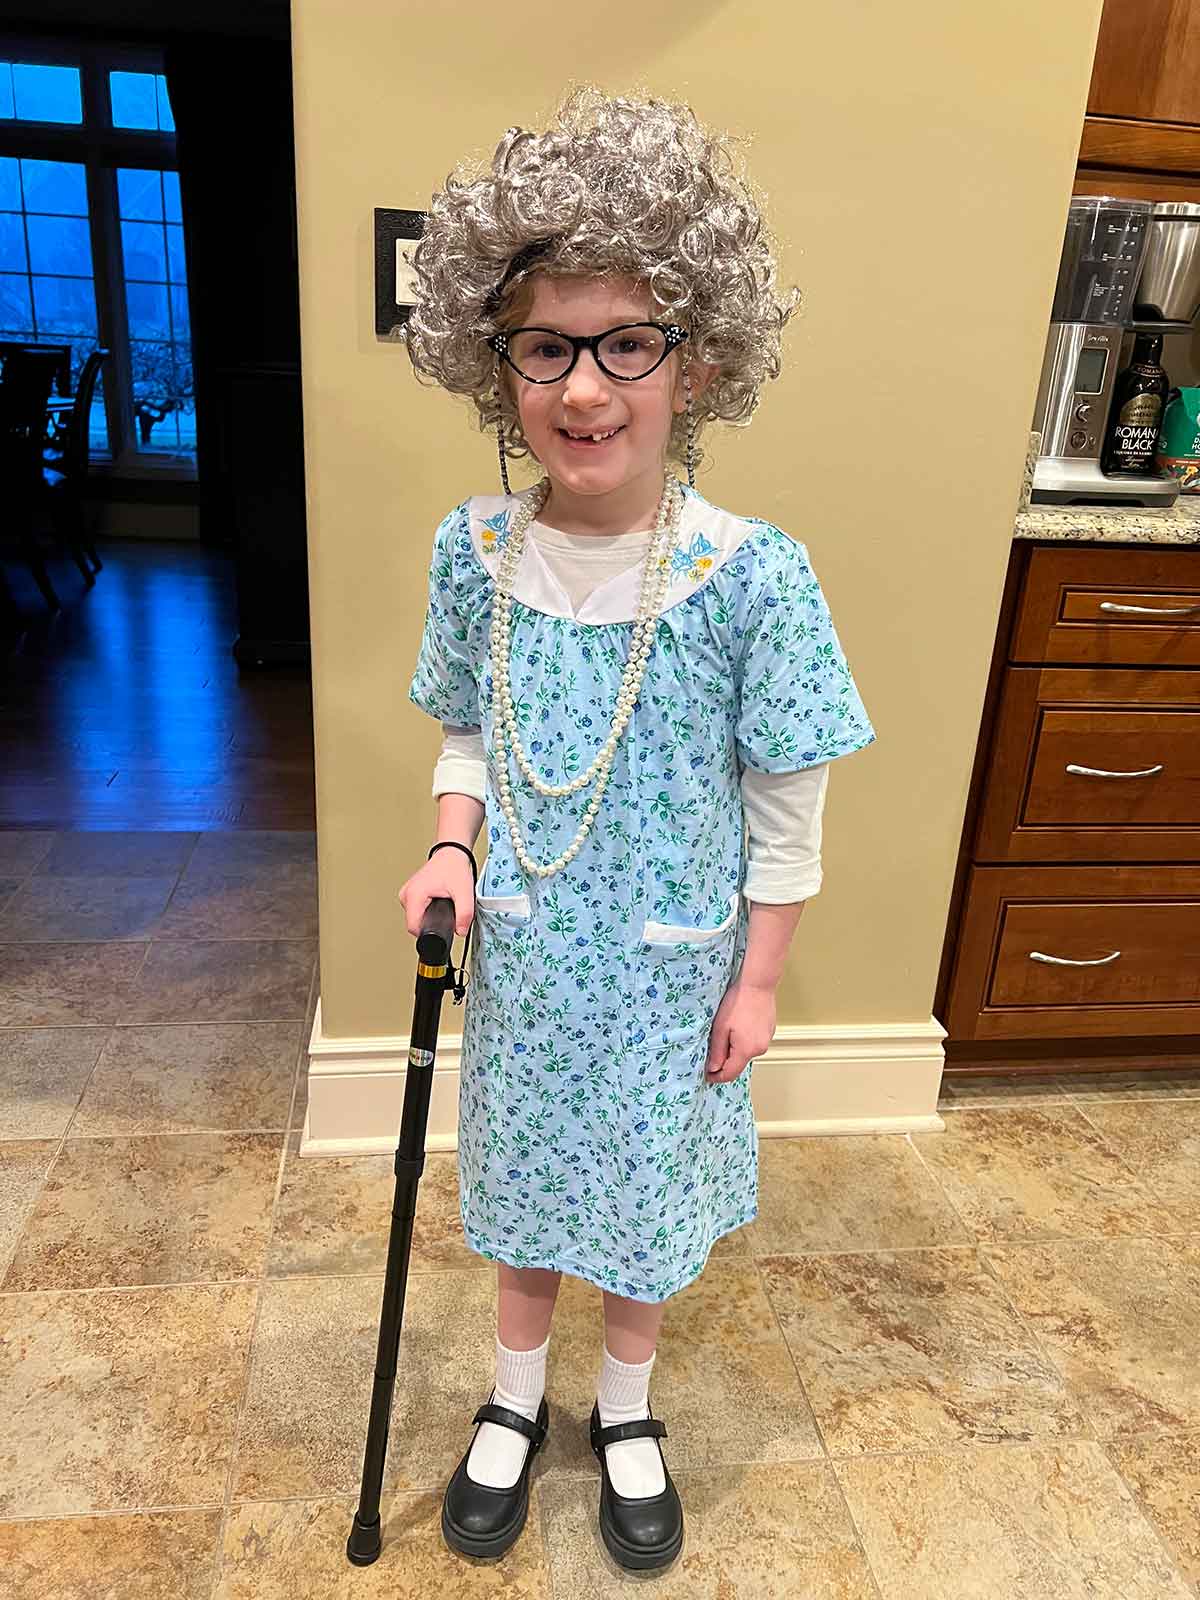 Little girl dressed up as an old lady and holding a cane.